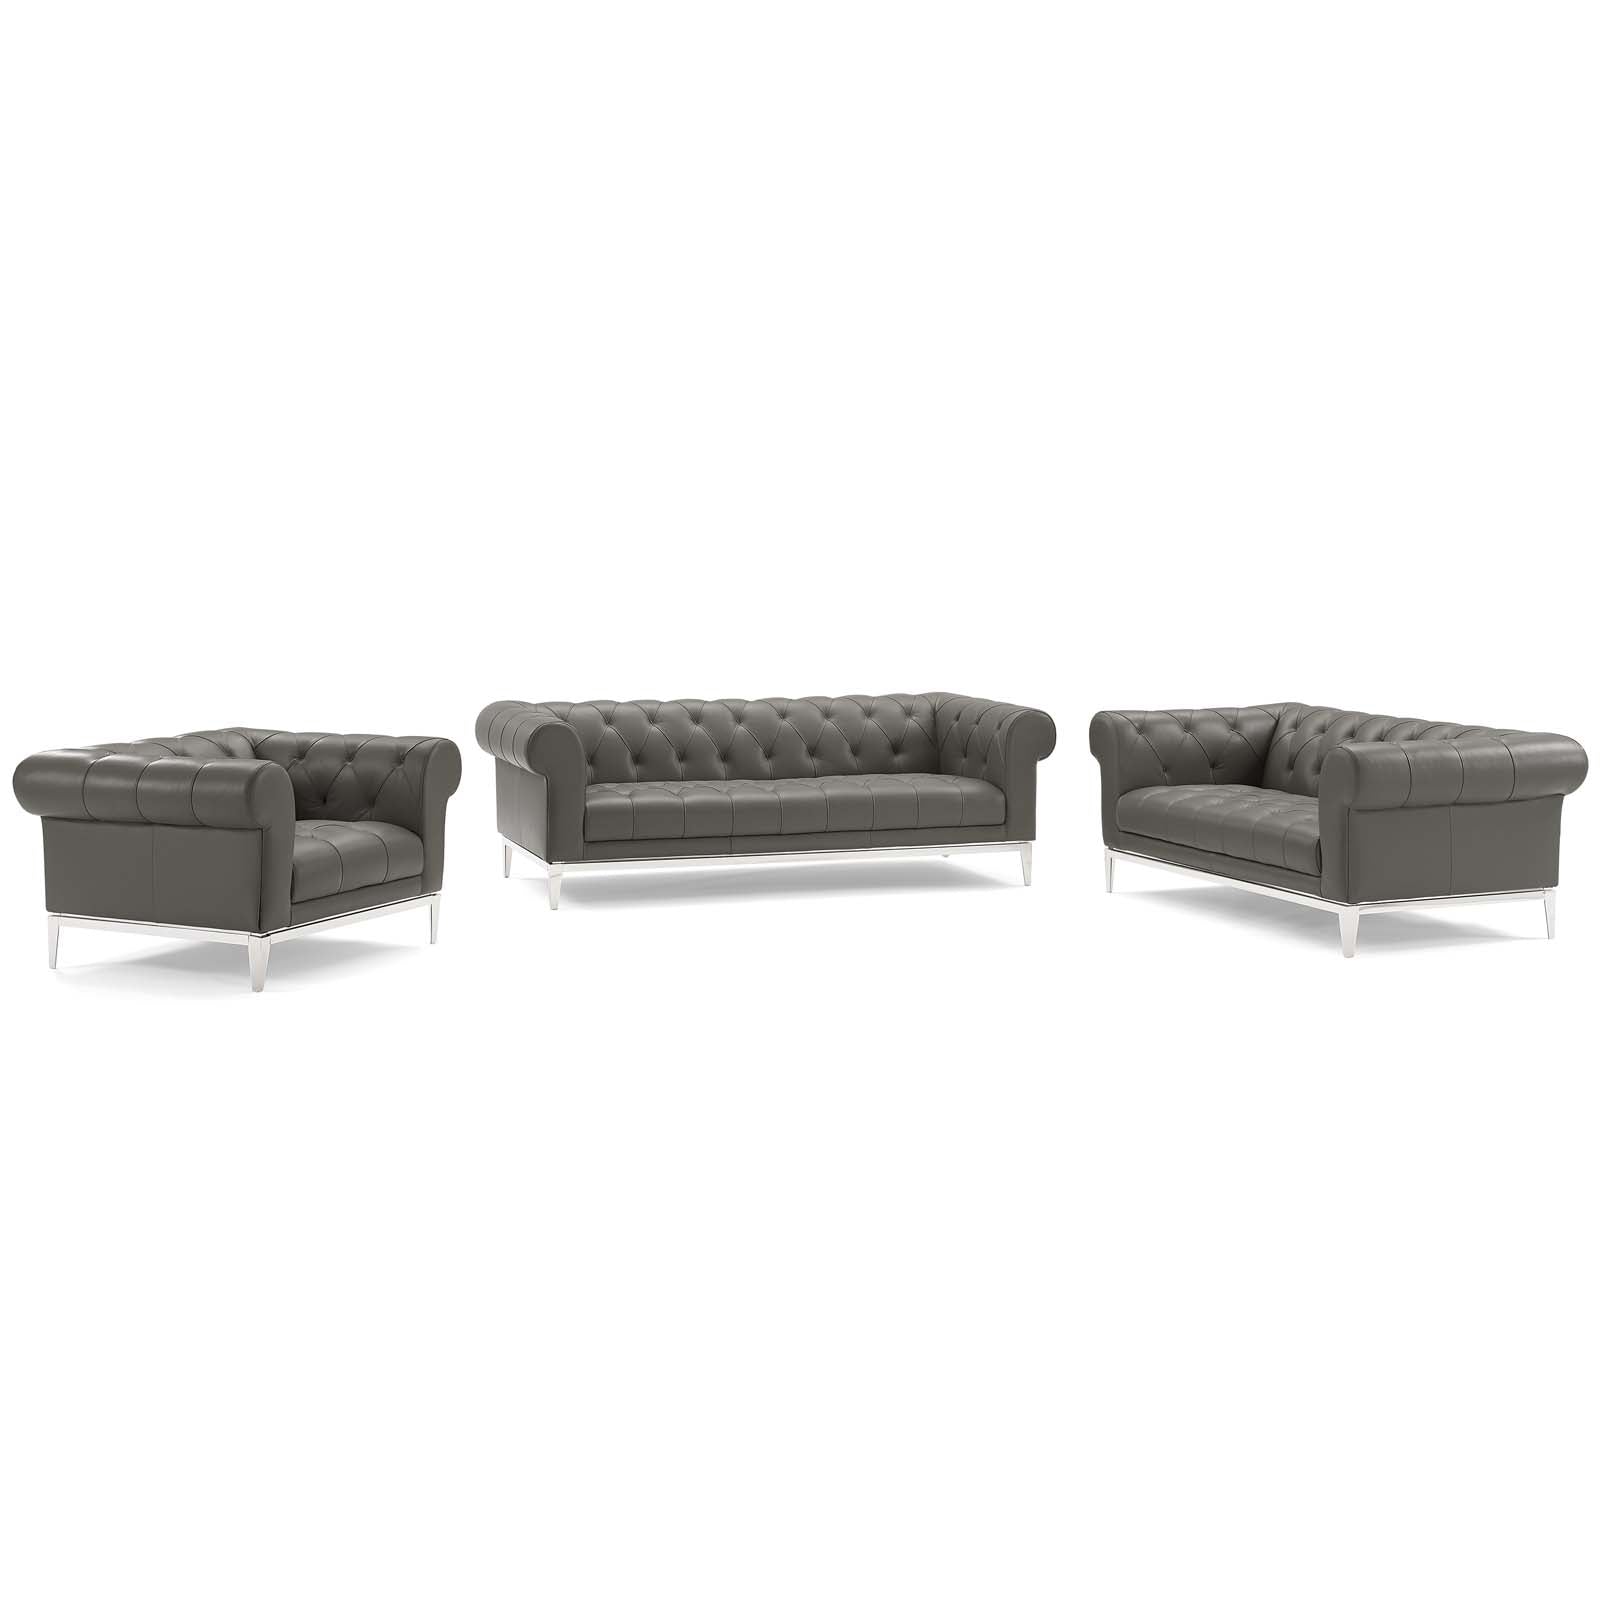 Modway Living Room Sets - Idyll-3-Piece-Upholstered-Leather-Set-Gray